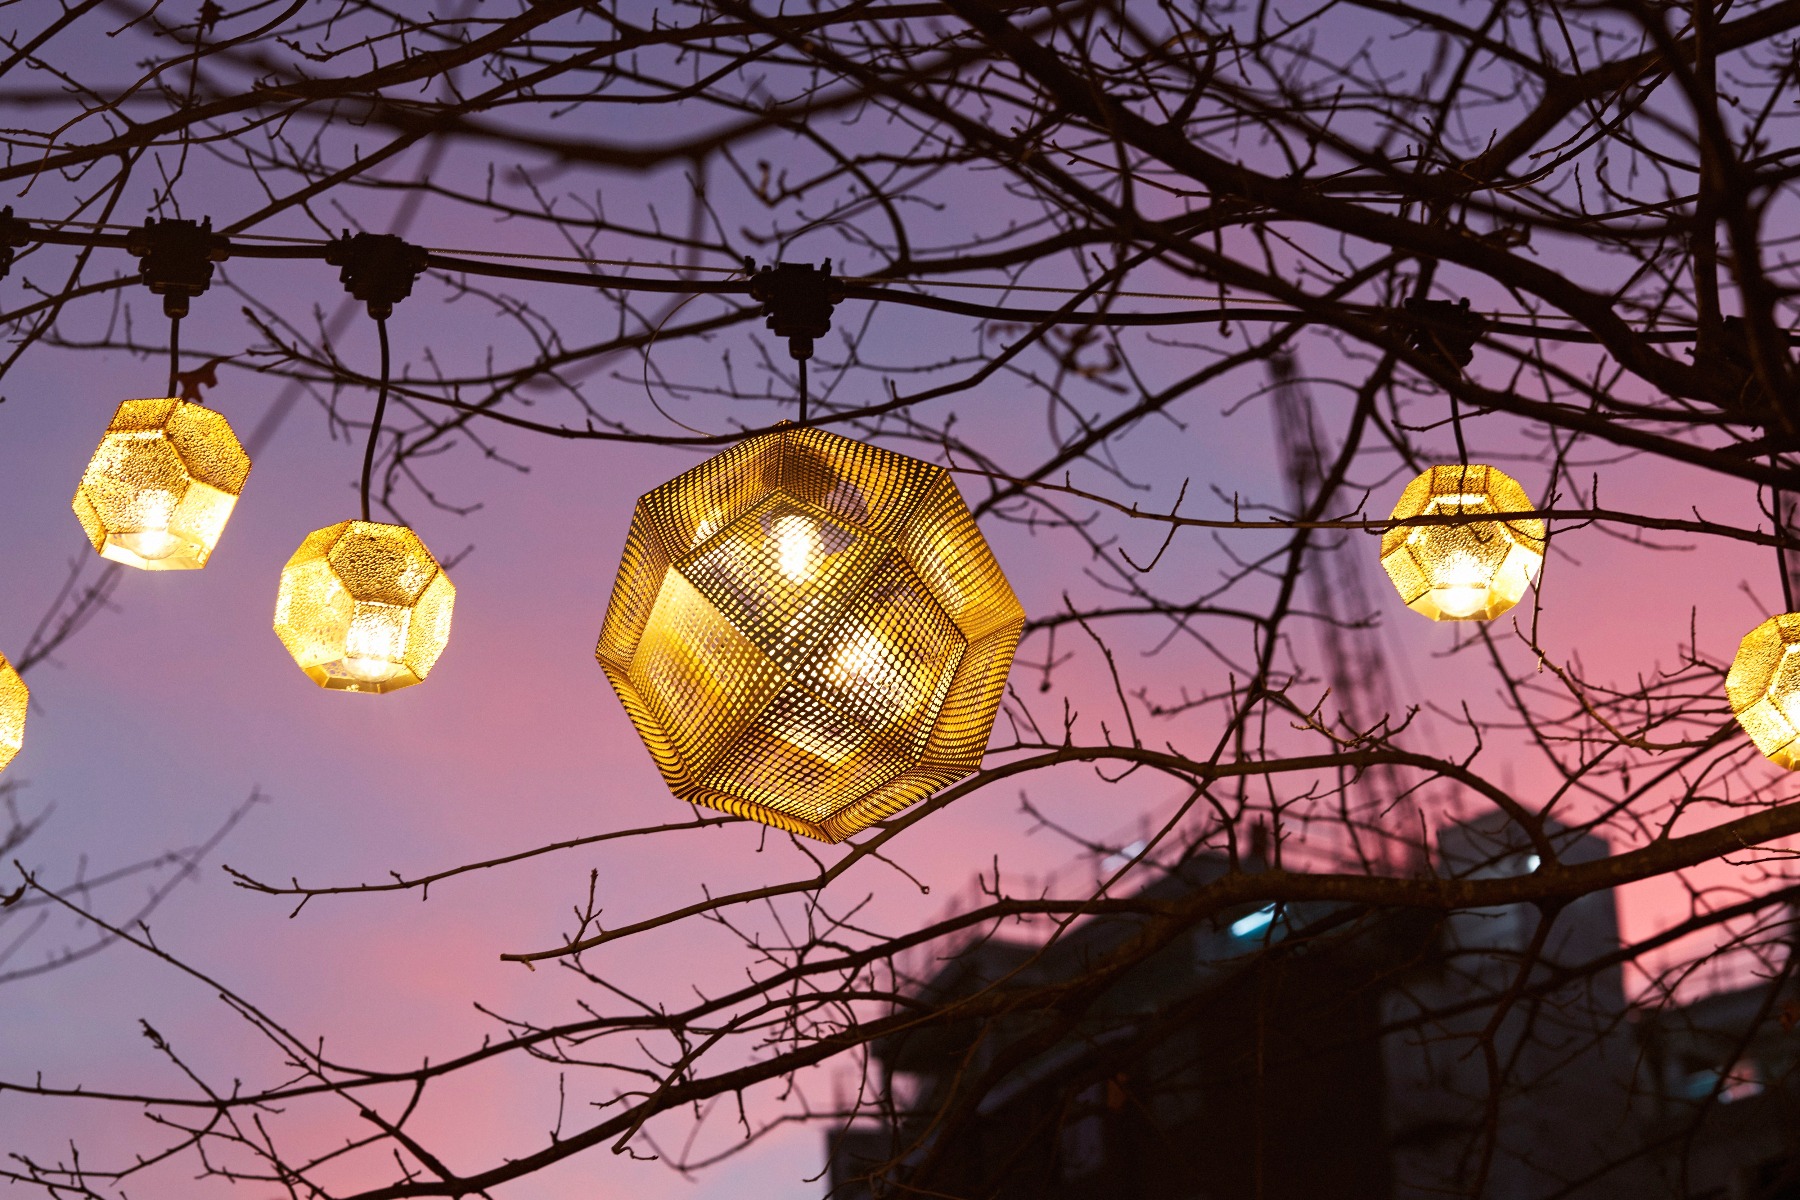 Tom Dixon's Christmas Lights at Television Centre